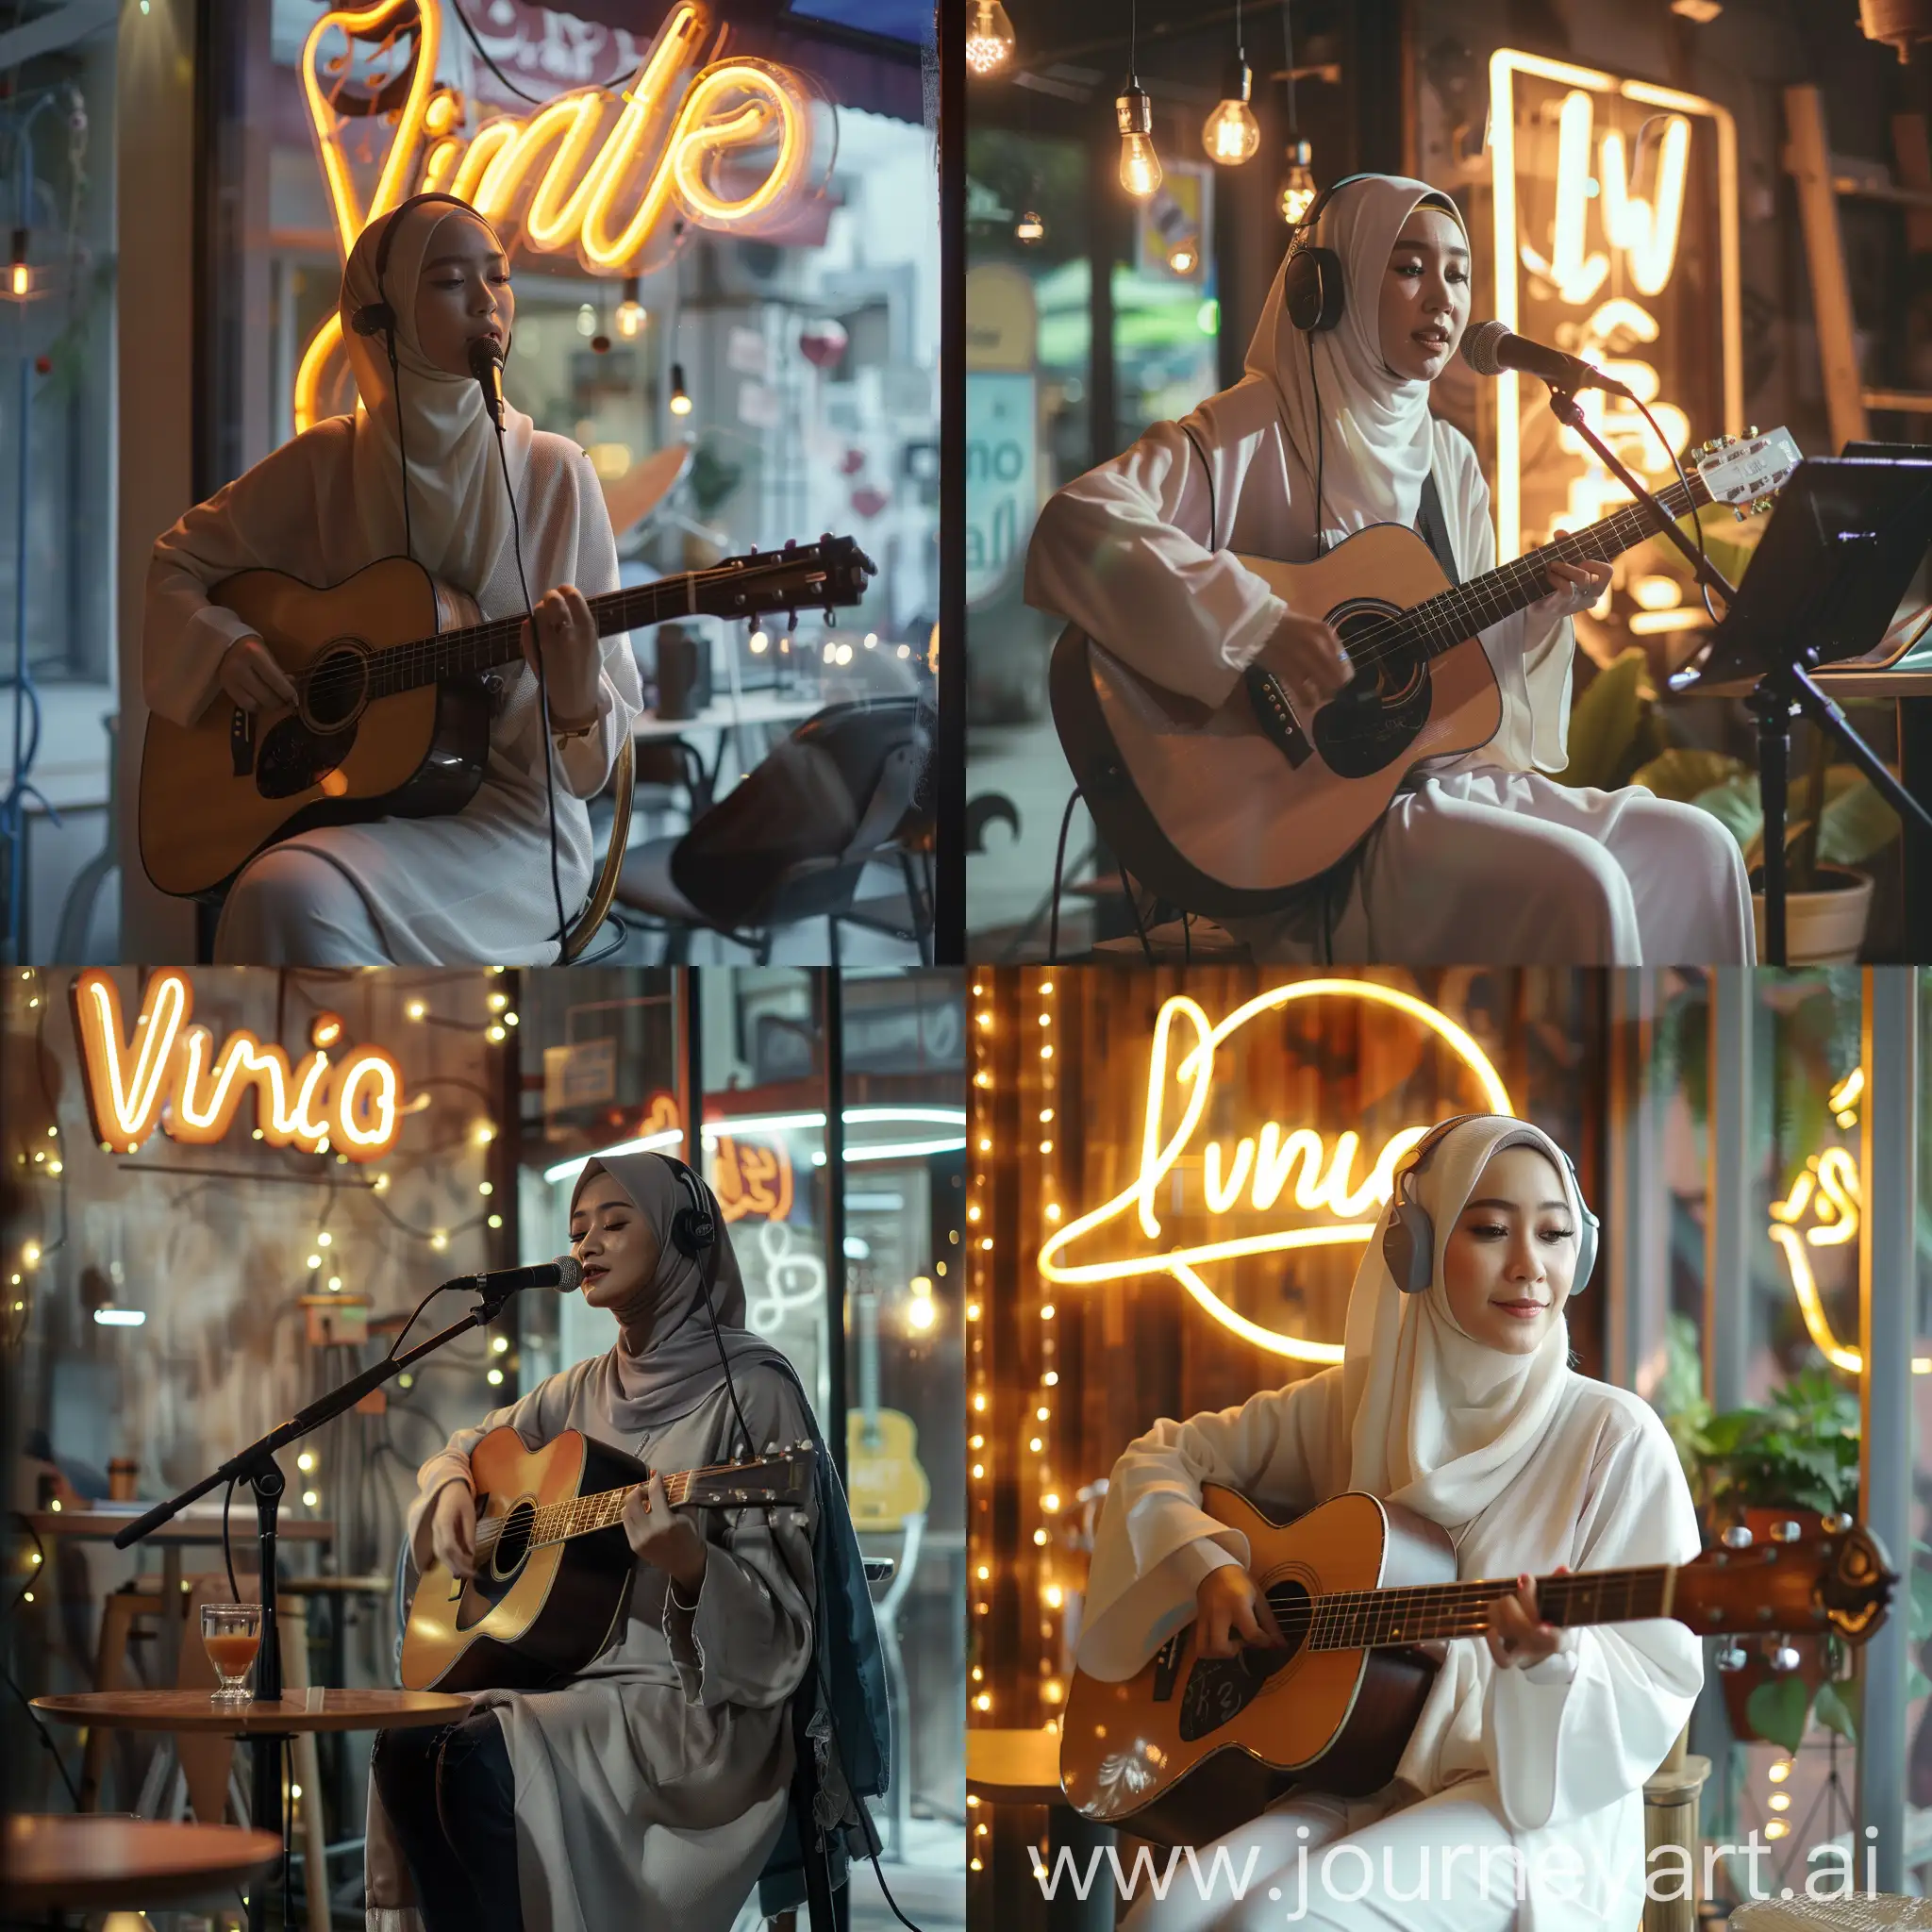 Indonesian-Hijab-Woman-Playing-Acoustic-Music-in-Coffee-Shop